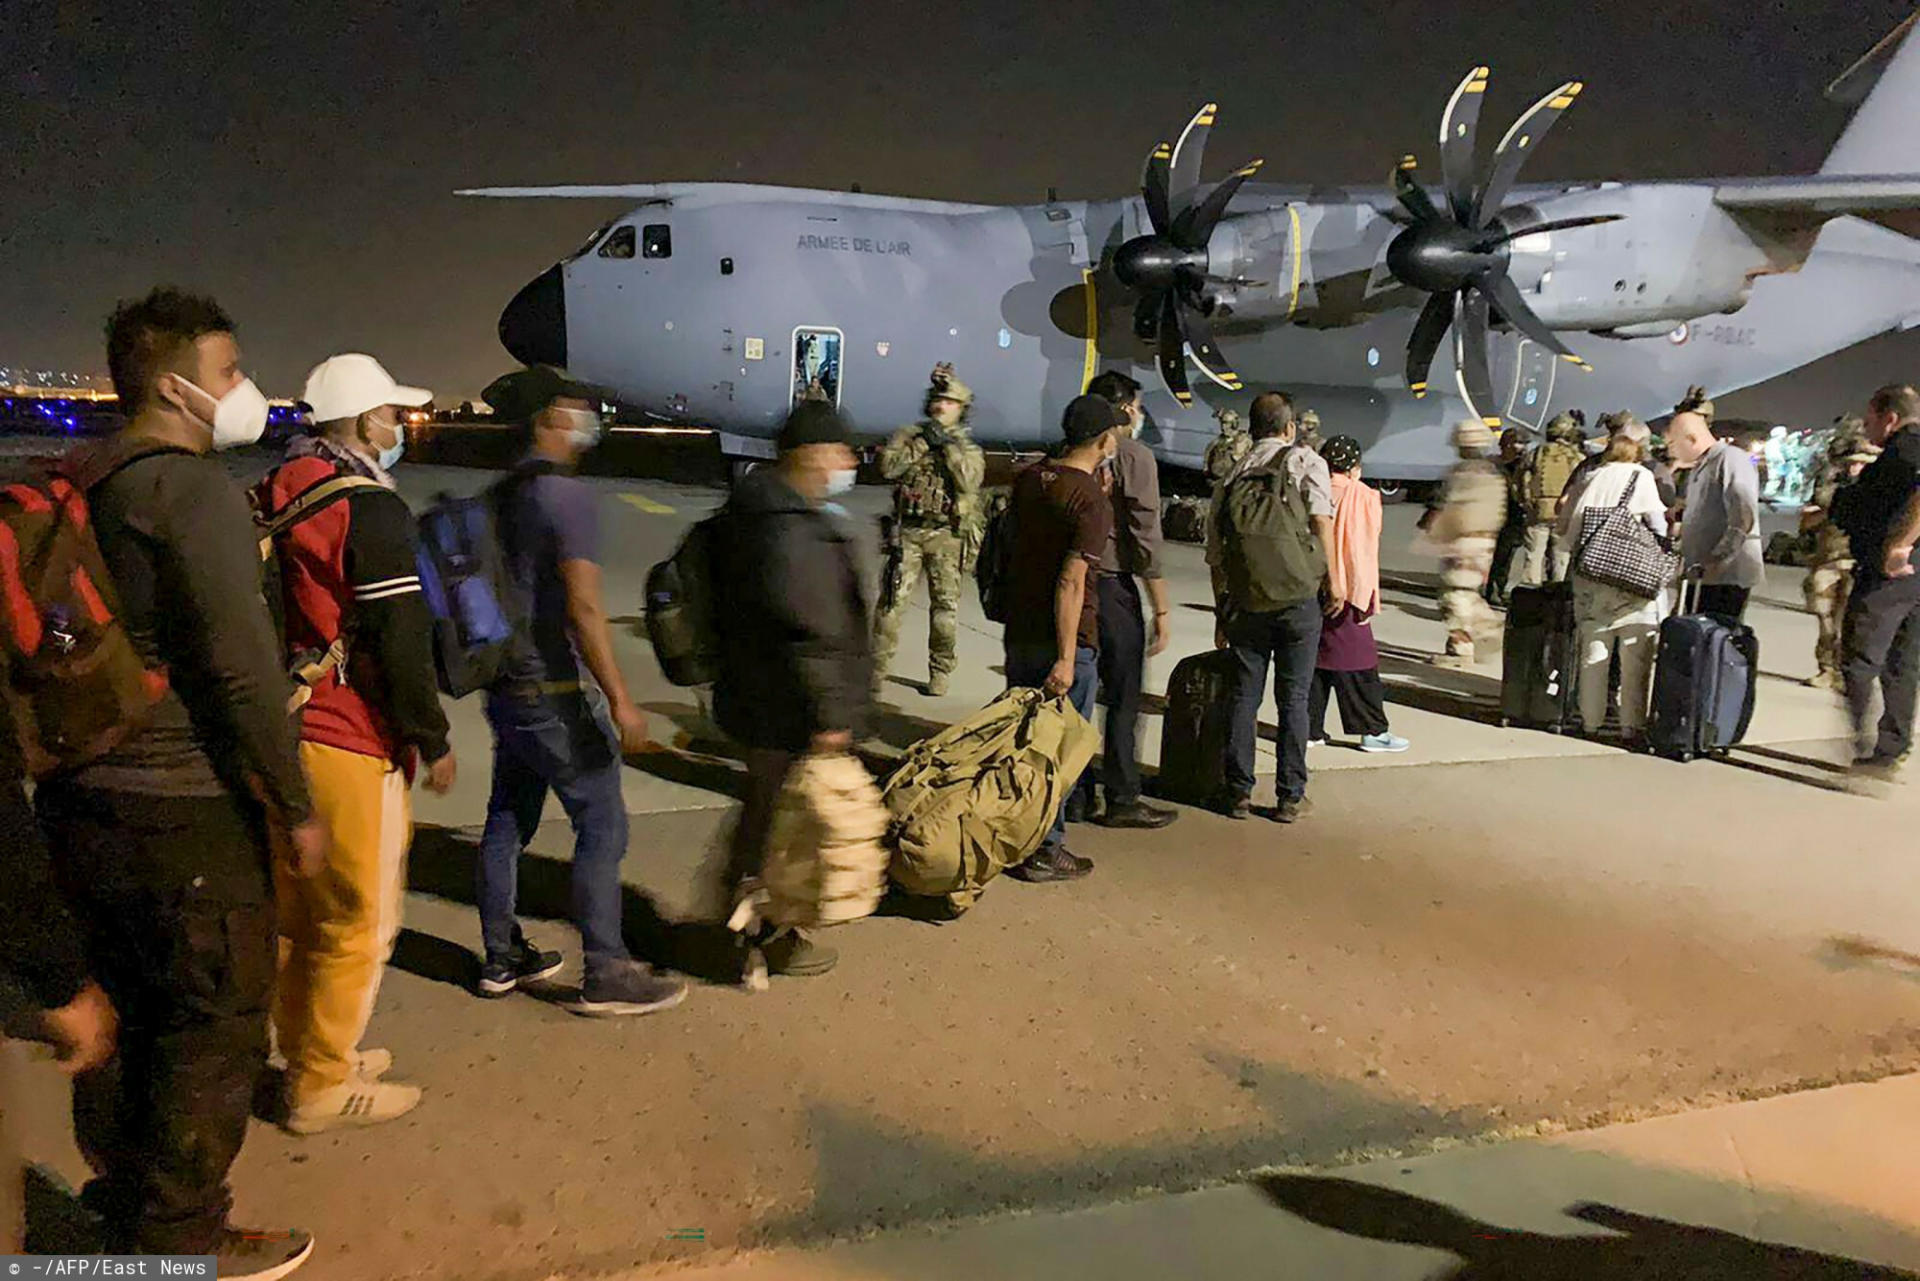 French nationals and their Afghan colleagues line up to board a French military transport plane at the Kabul airport on August 17, 2021, for evacuation from Afghanistan after the Taliban's stunning military takeover of the country. (Photo by - / AFP)